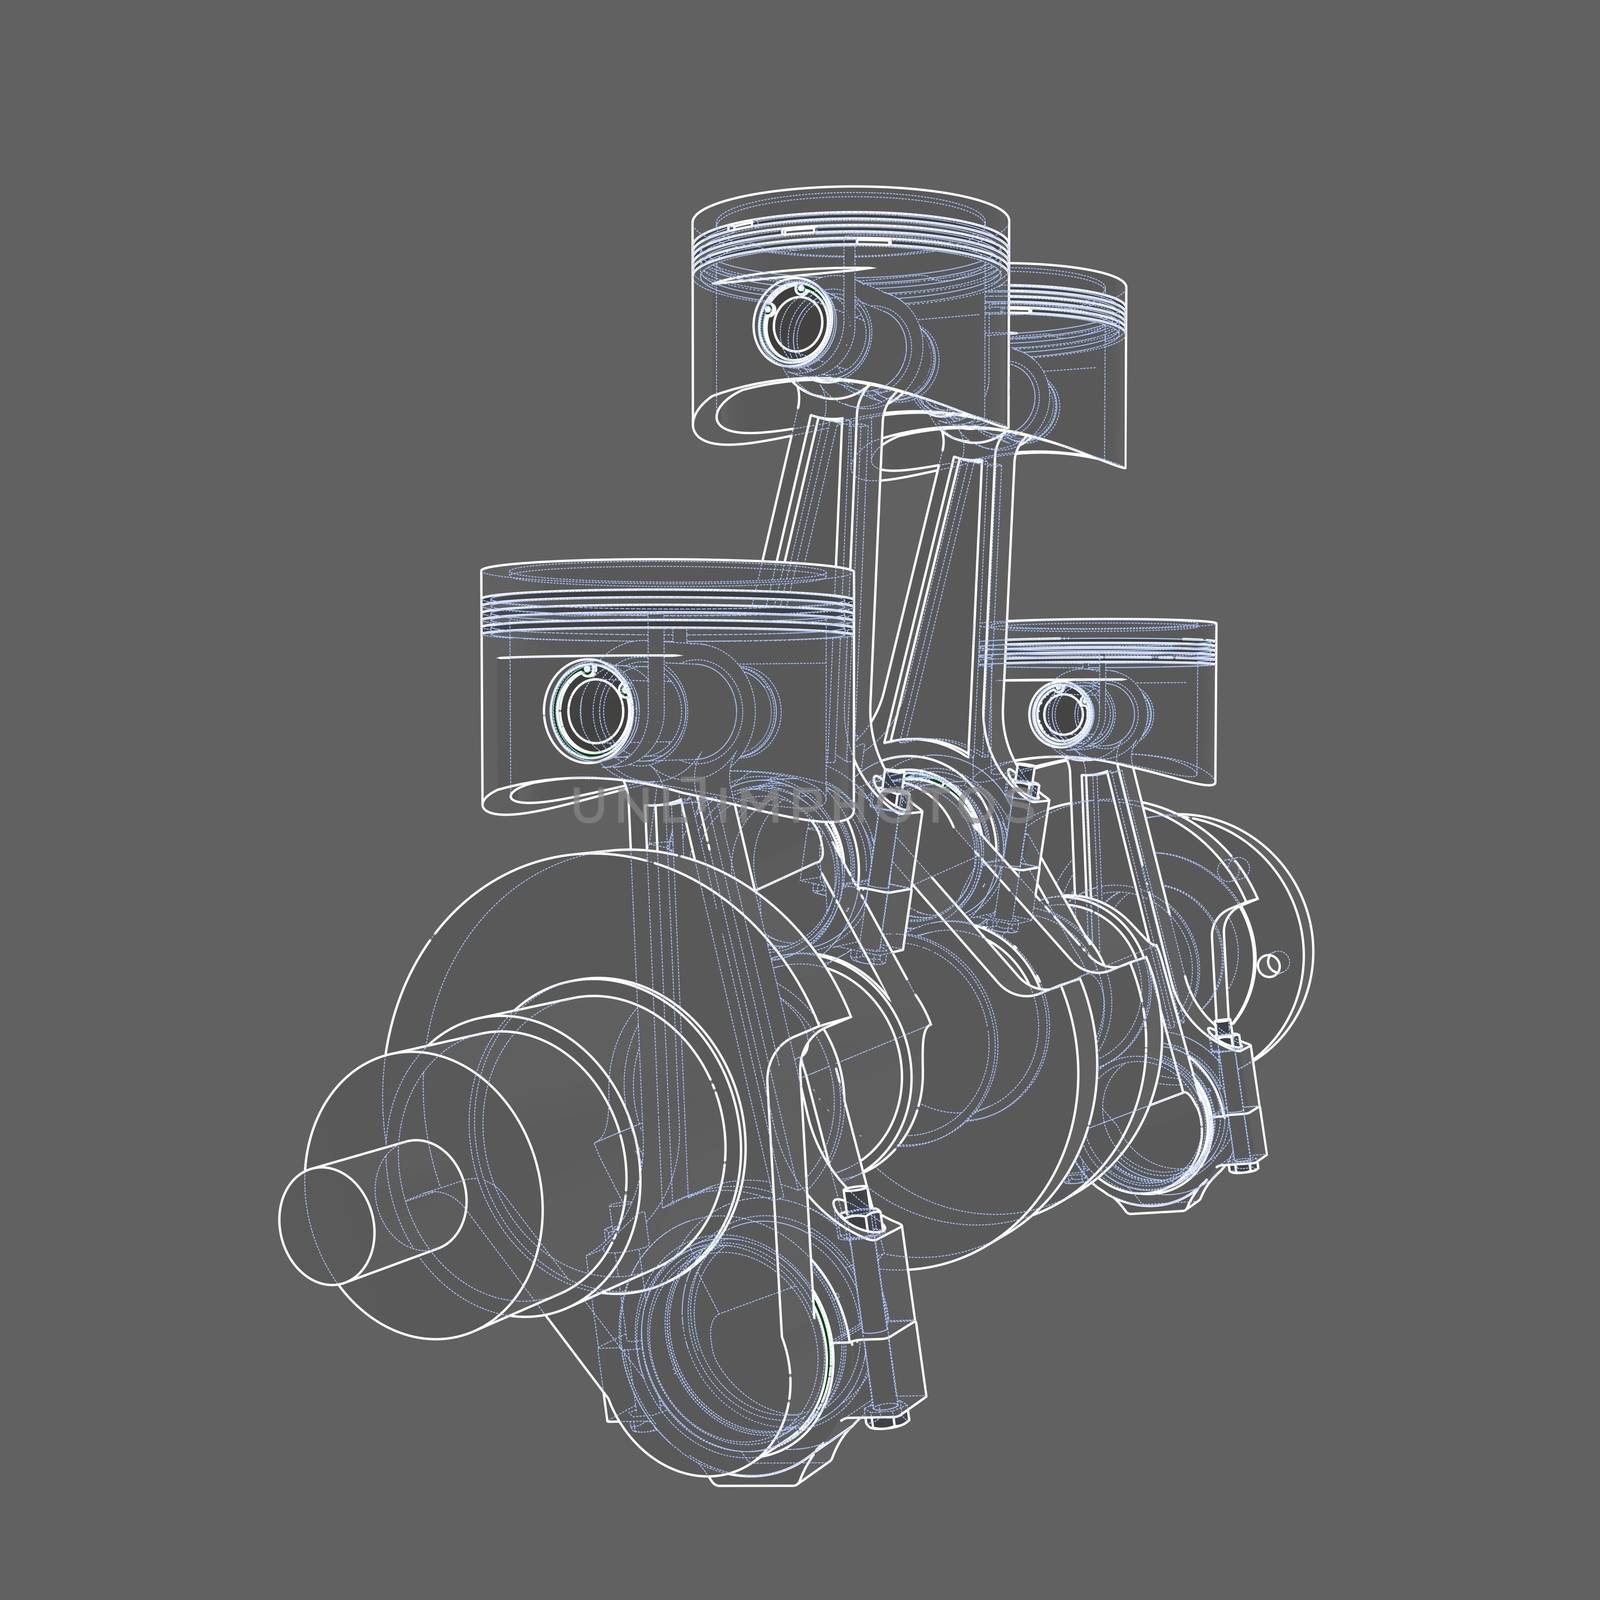 Engine pistons outline. 3D illustration. White lines and grey background